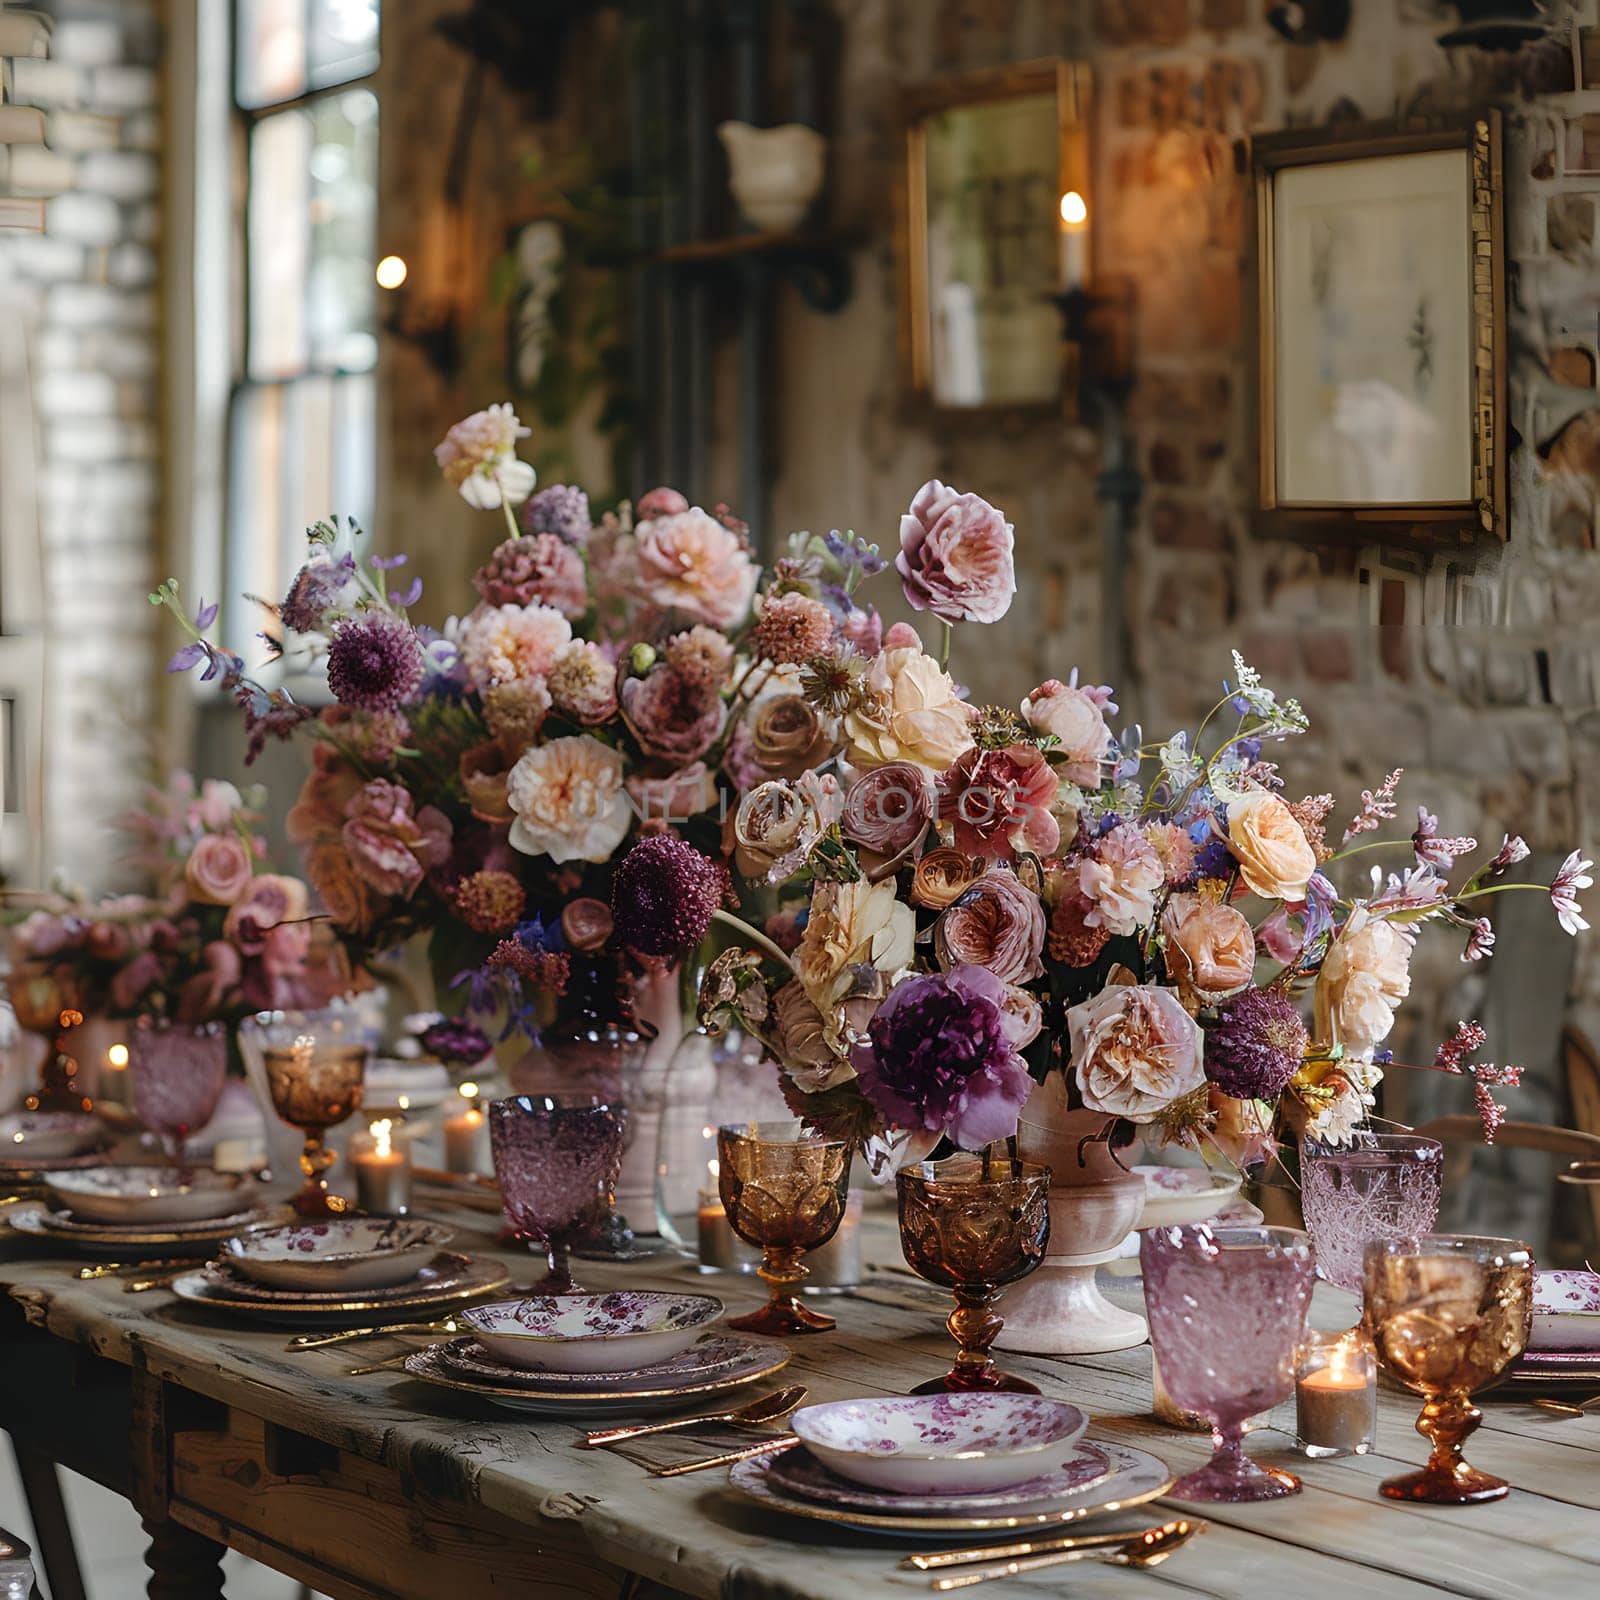 The table is beautifully set with purple vases of flowers, matching plates, and glasses. The violet petals create a stunning centerpiece